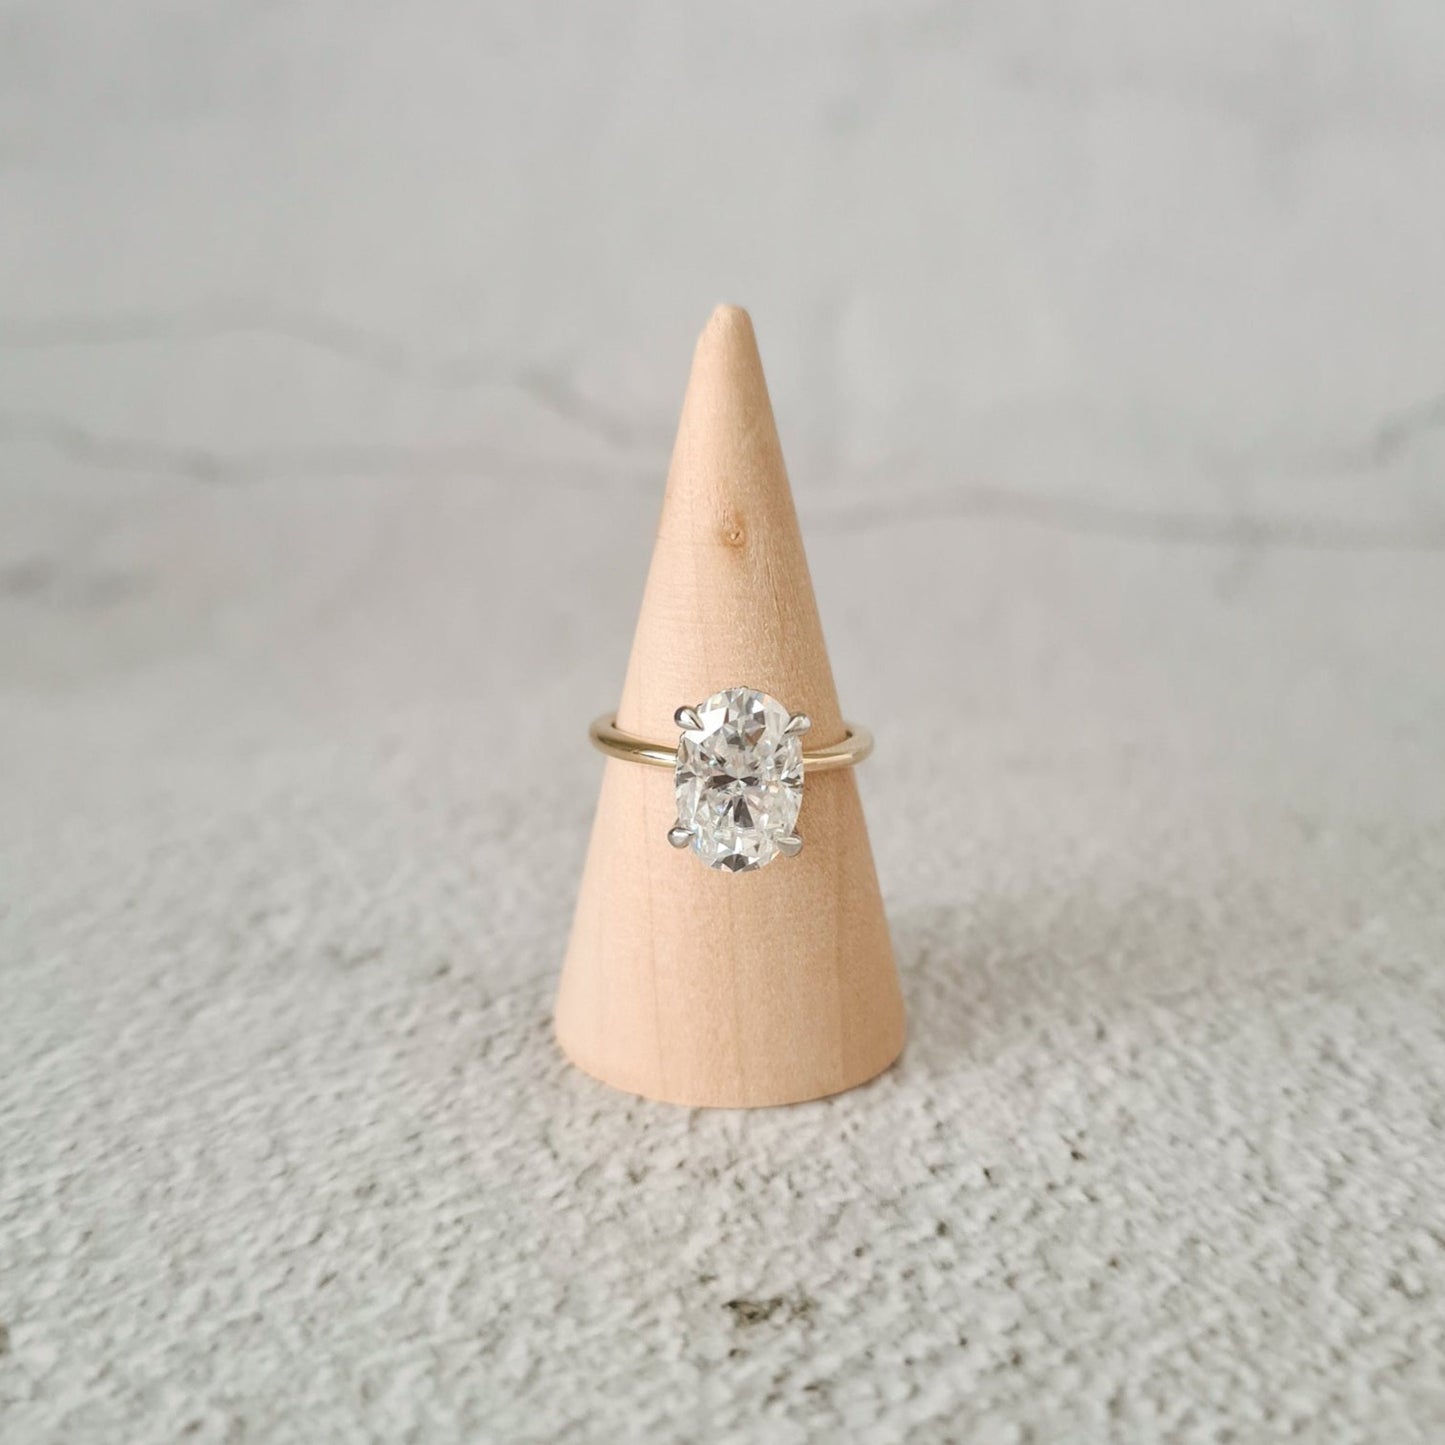 Large Solitaire Oval Moissanite Ring